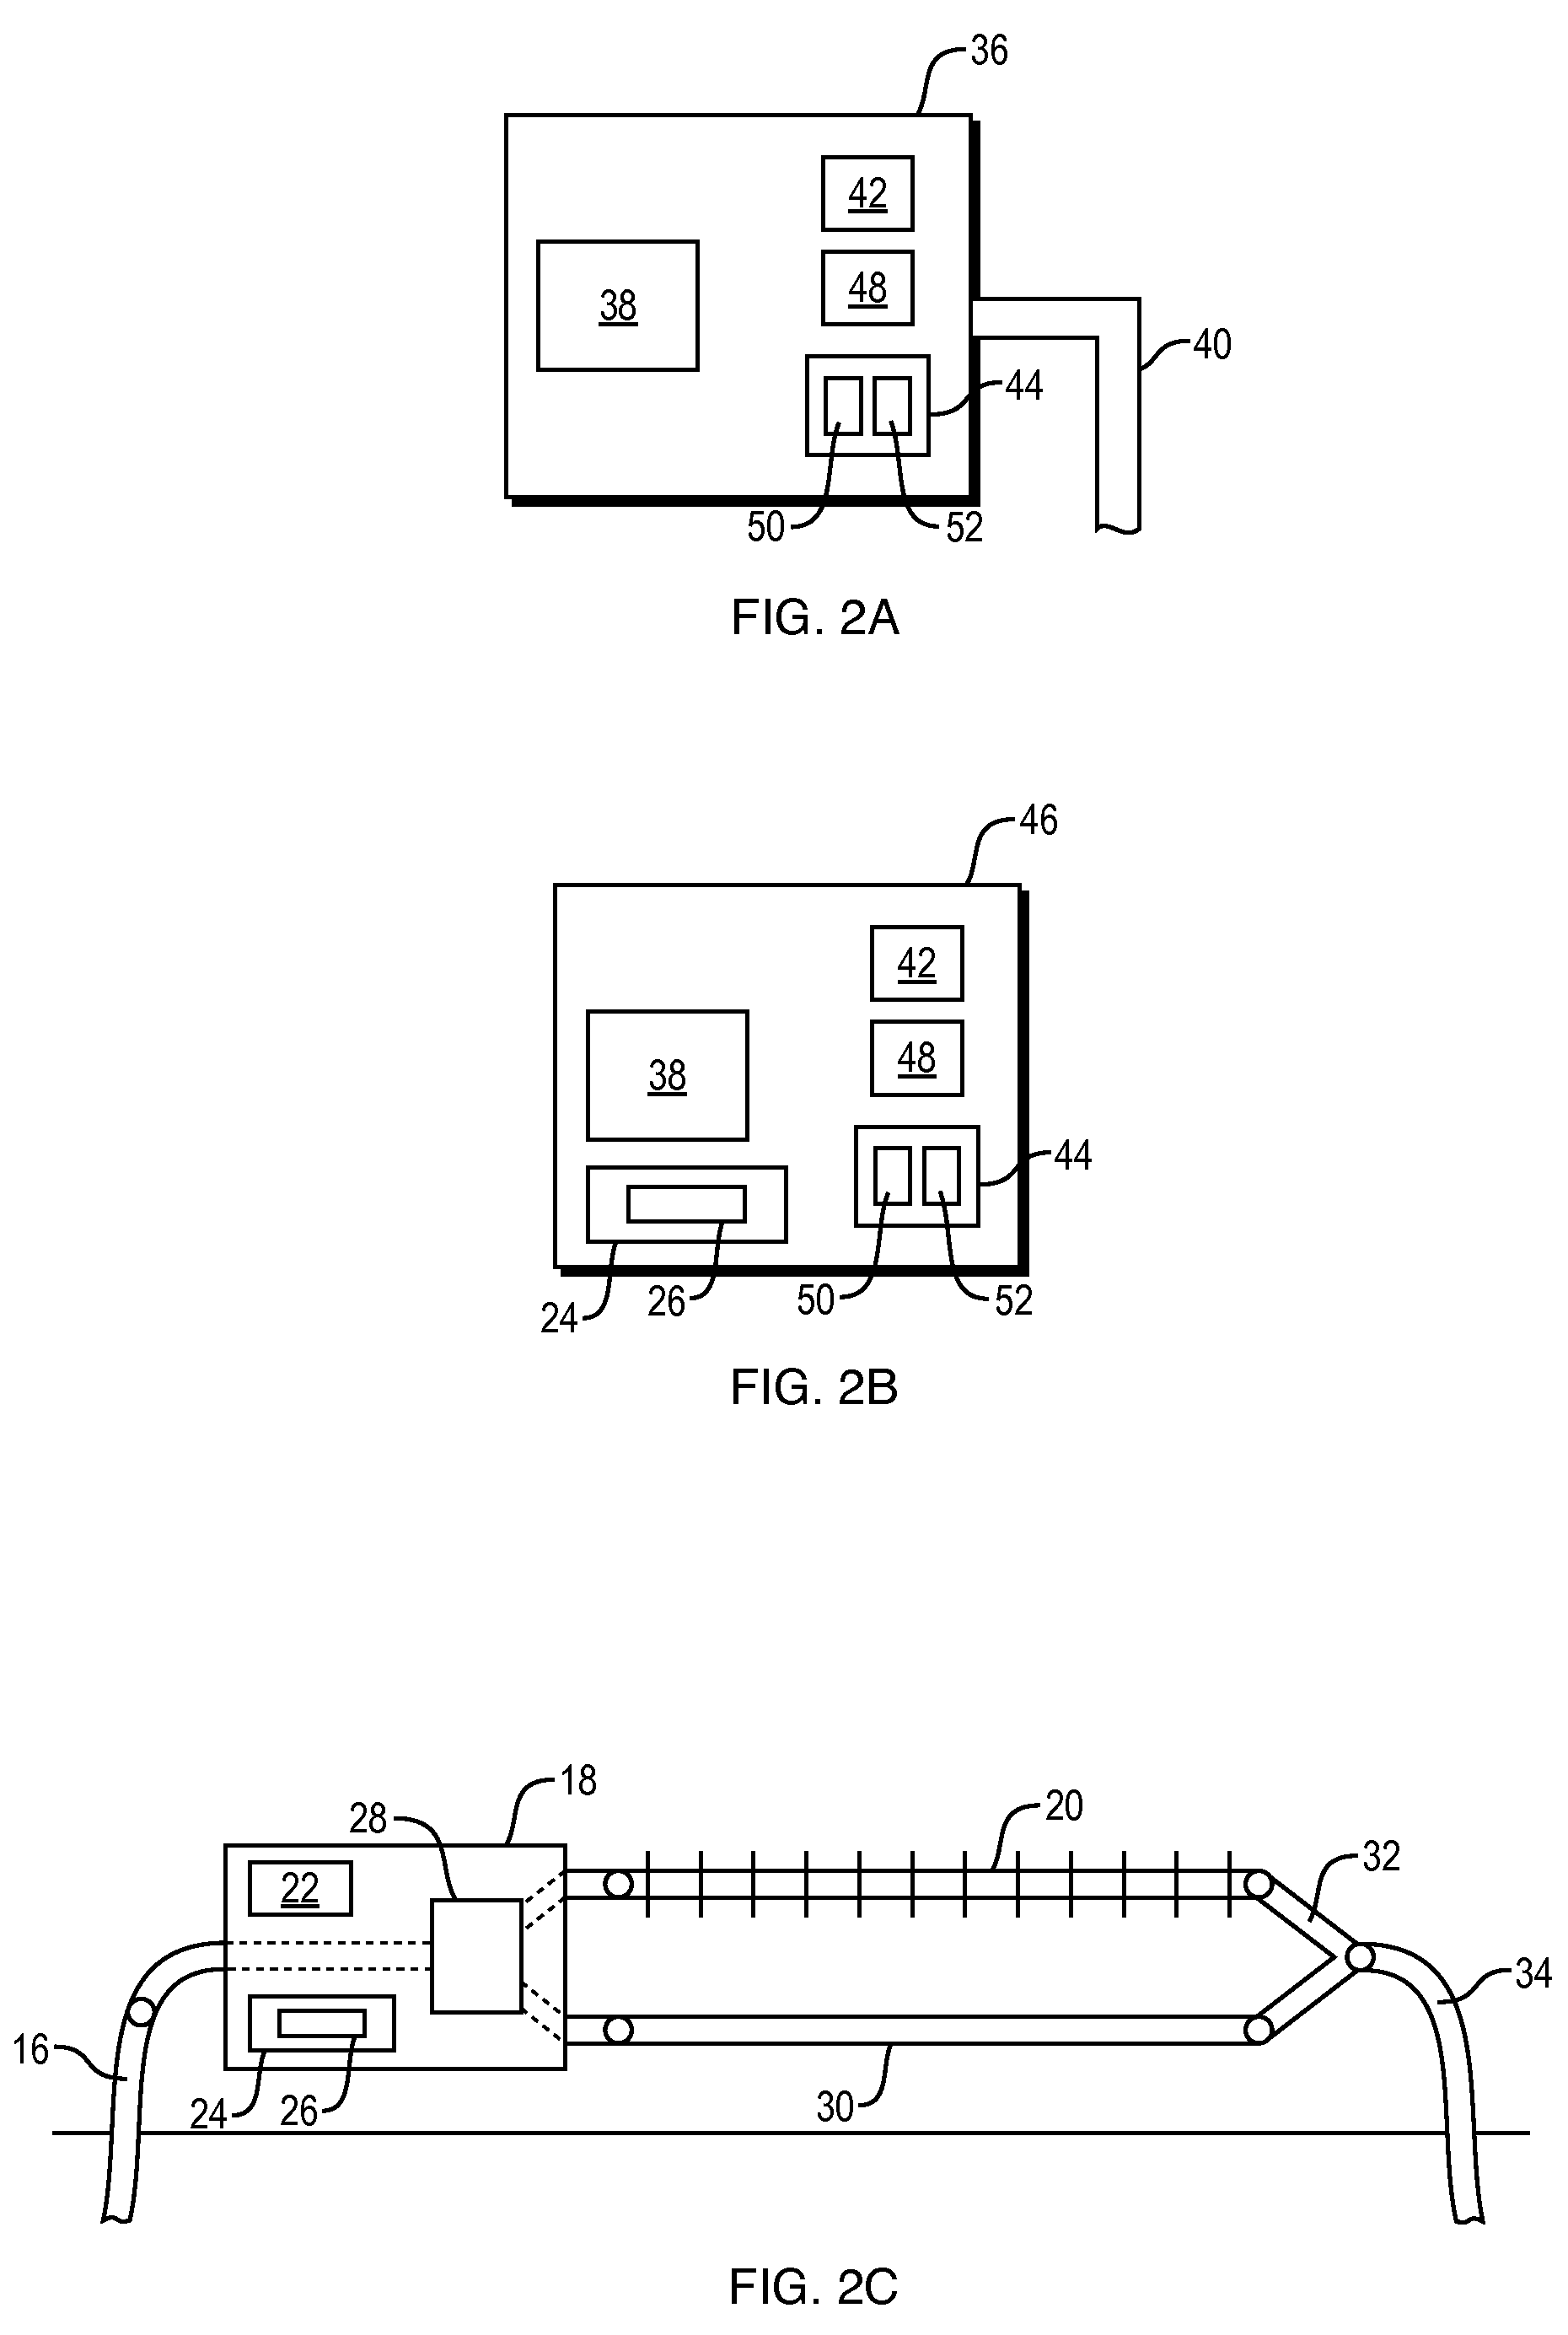 System and method for creating multizones from a single zone heating system